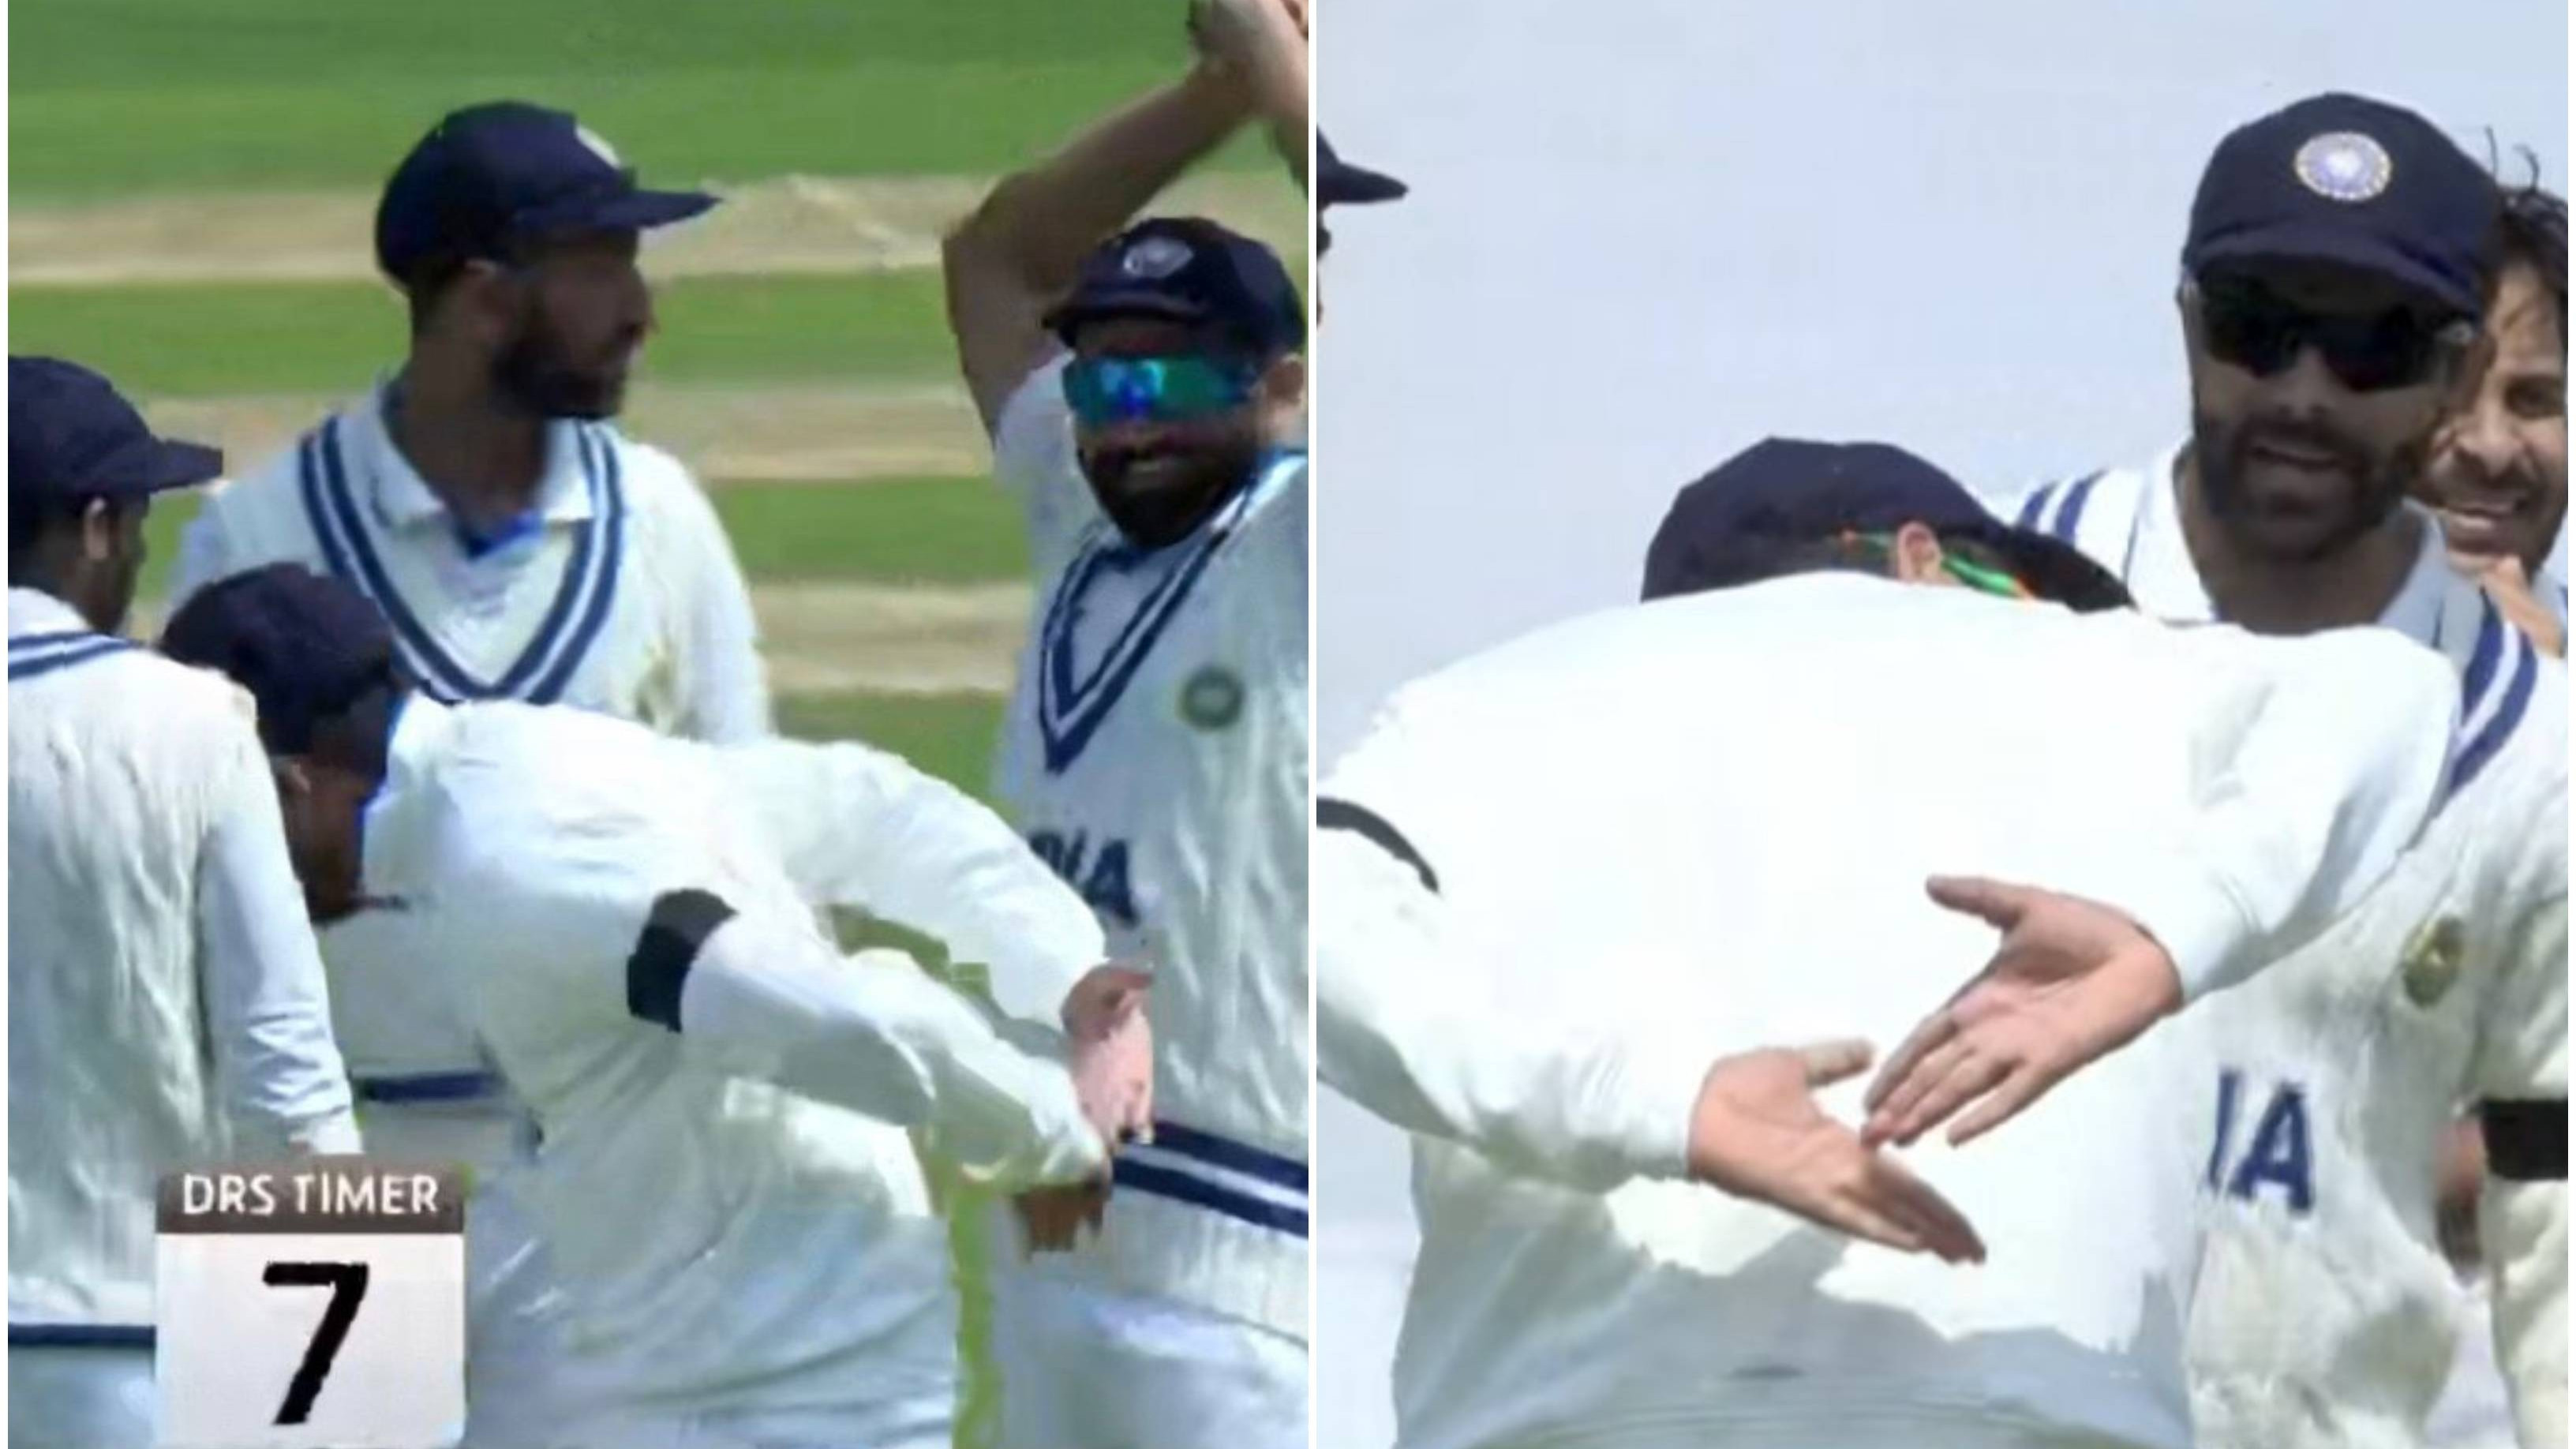 WTC 2023 Final: WATCH - Rohit Sharma's hilarious no-look gesture to umpire for DRS as India look for a breakthrough